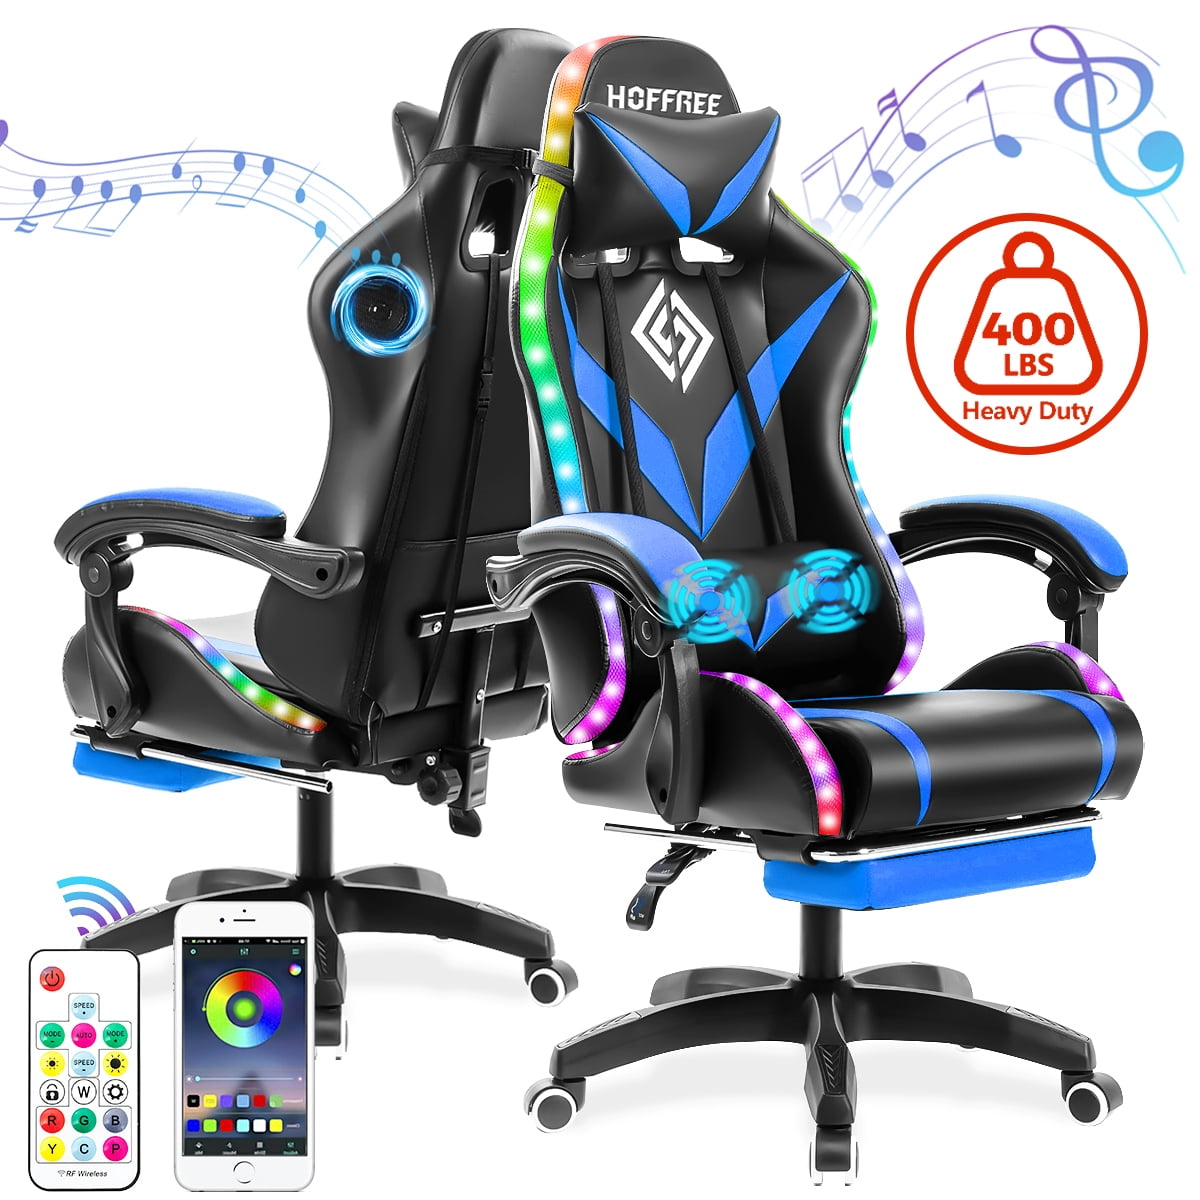 Roei uit Tenen Meander Hoffree Bluetooth Speaker Gaming Chairs with Massage, Video Racing Style  Ergonomic PC Computer Office Chairs with RGB LED Lights, High Back  Adjustable Footrest Massgae Lumbar Pillow, 400lbs Load - Walmart.com